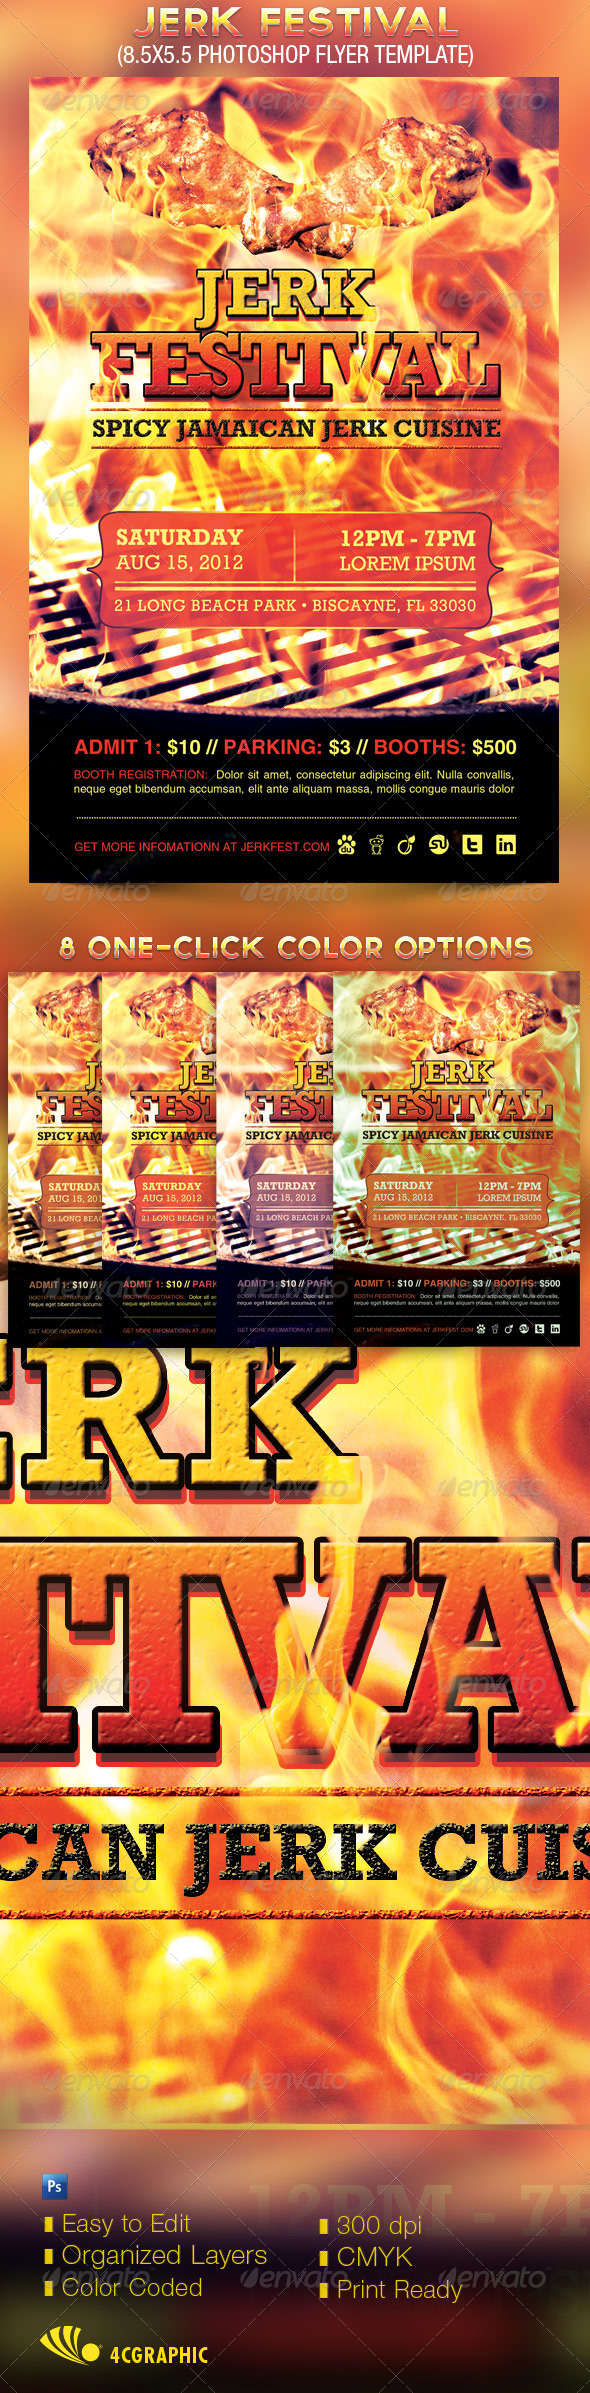 Festival Flyer Template from previews.customer.envatousercontent.com